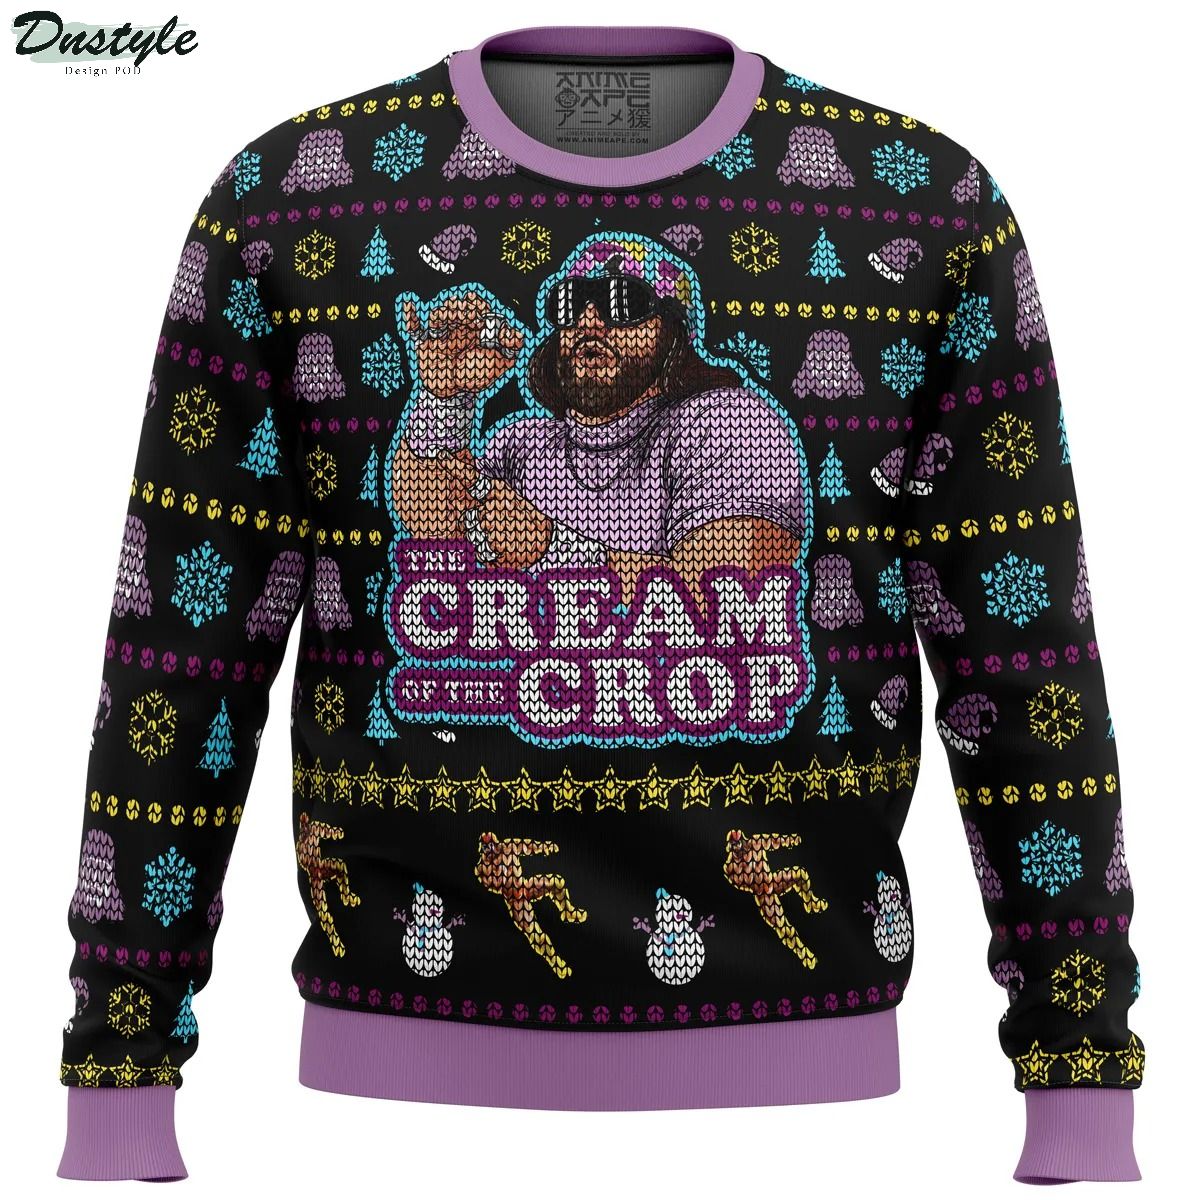 The cream of the crop randy savage pro wrestling ugly christmas sweater